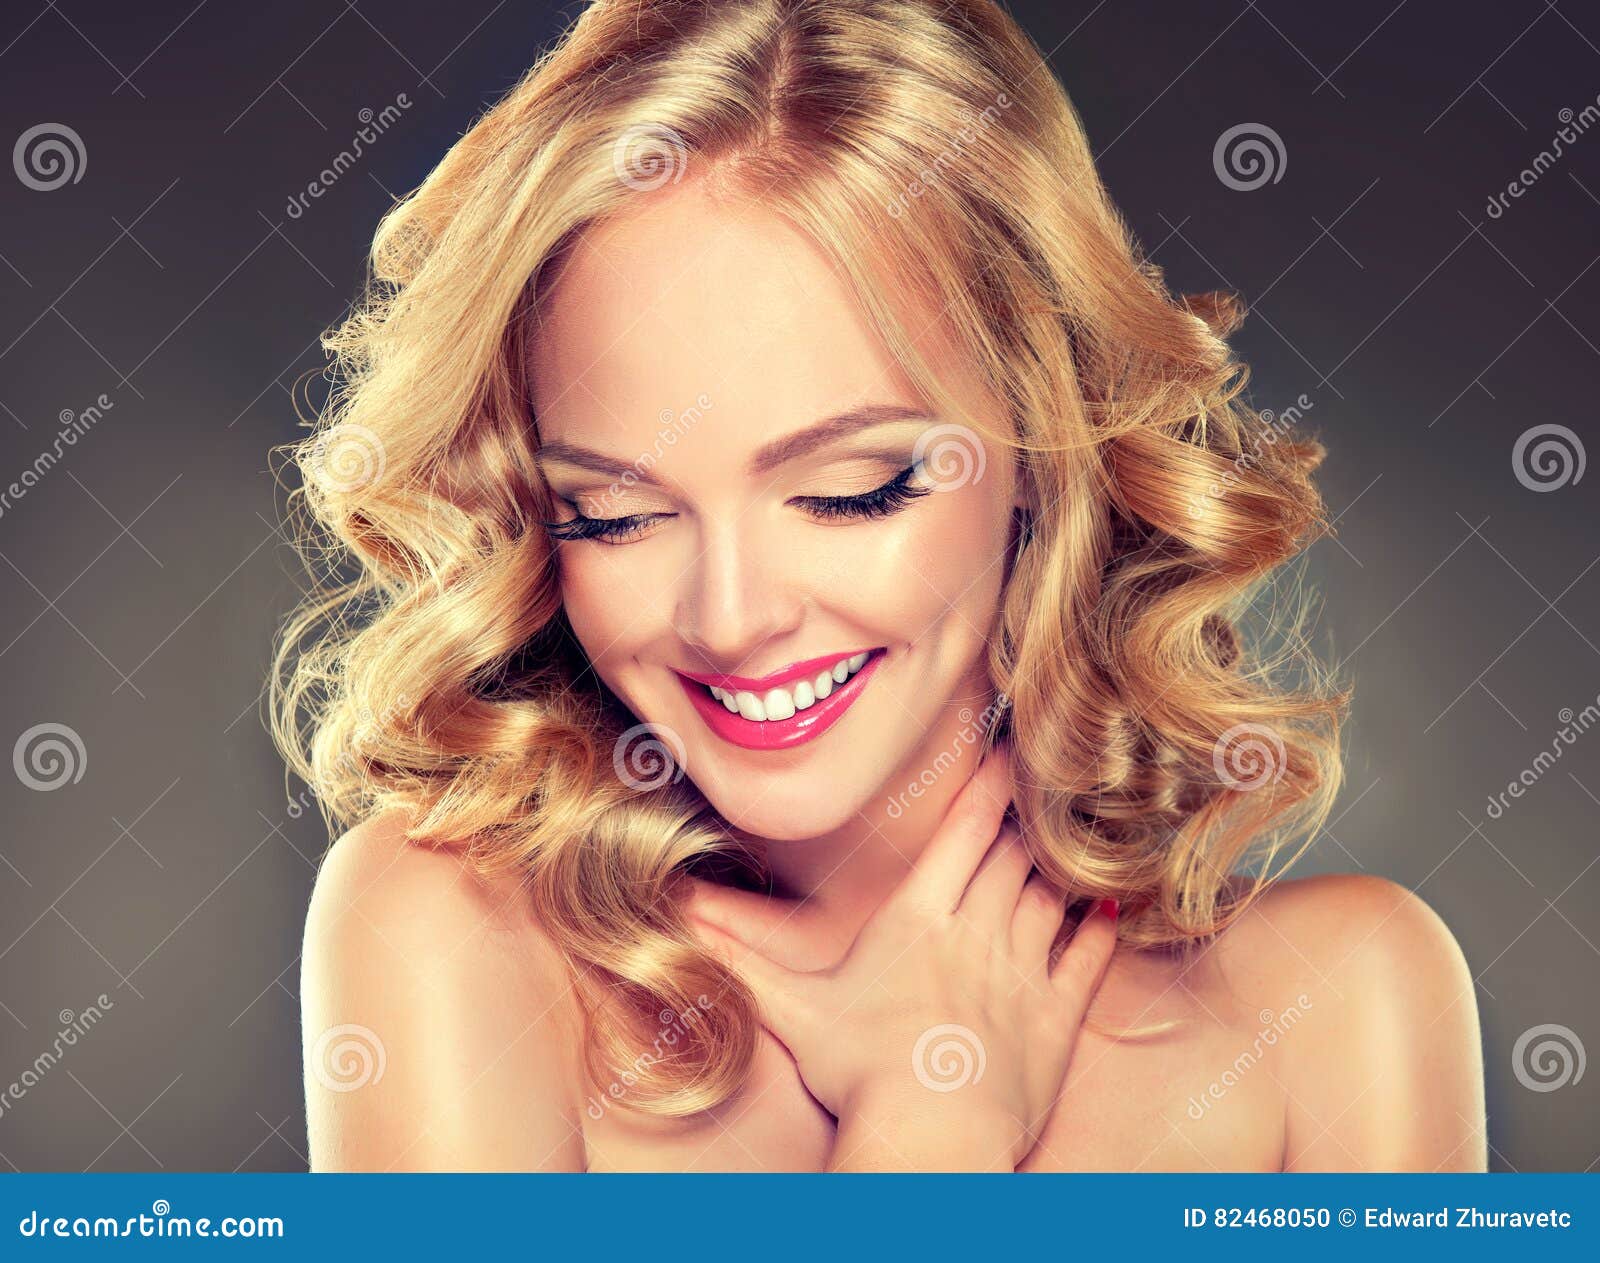 Young Wide Smiling Blonde Haired Girl Model Stock Photo Image